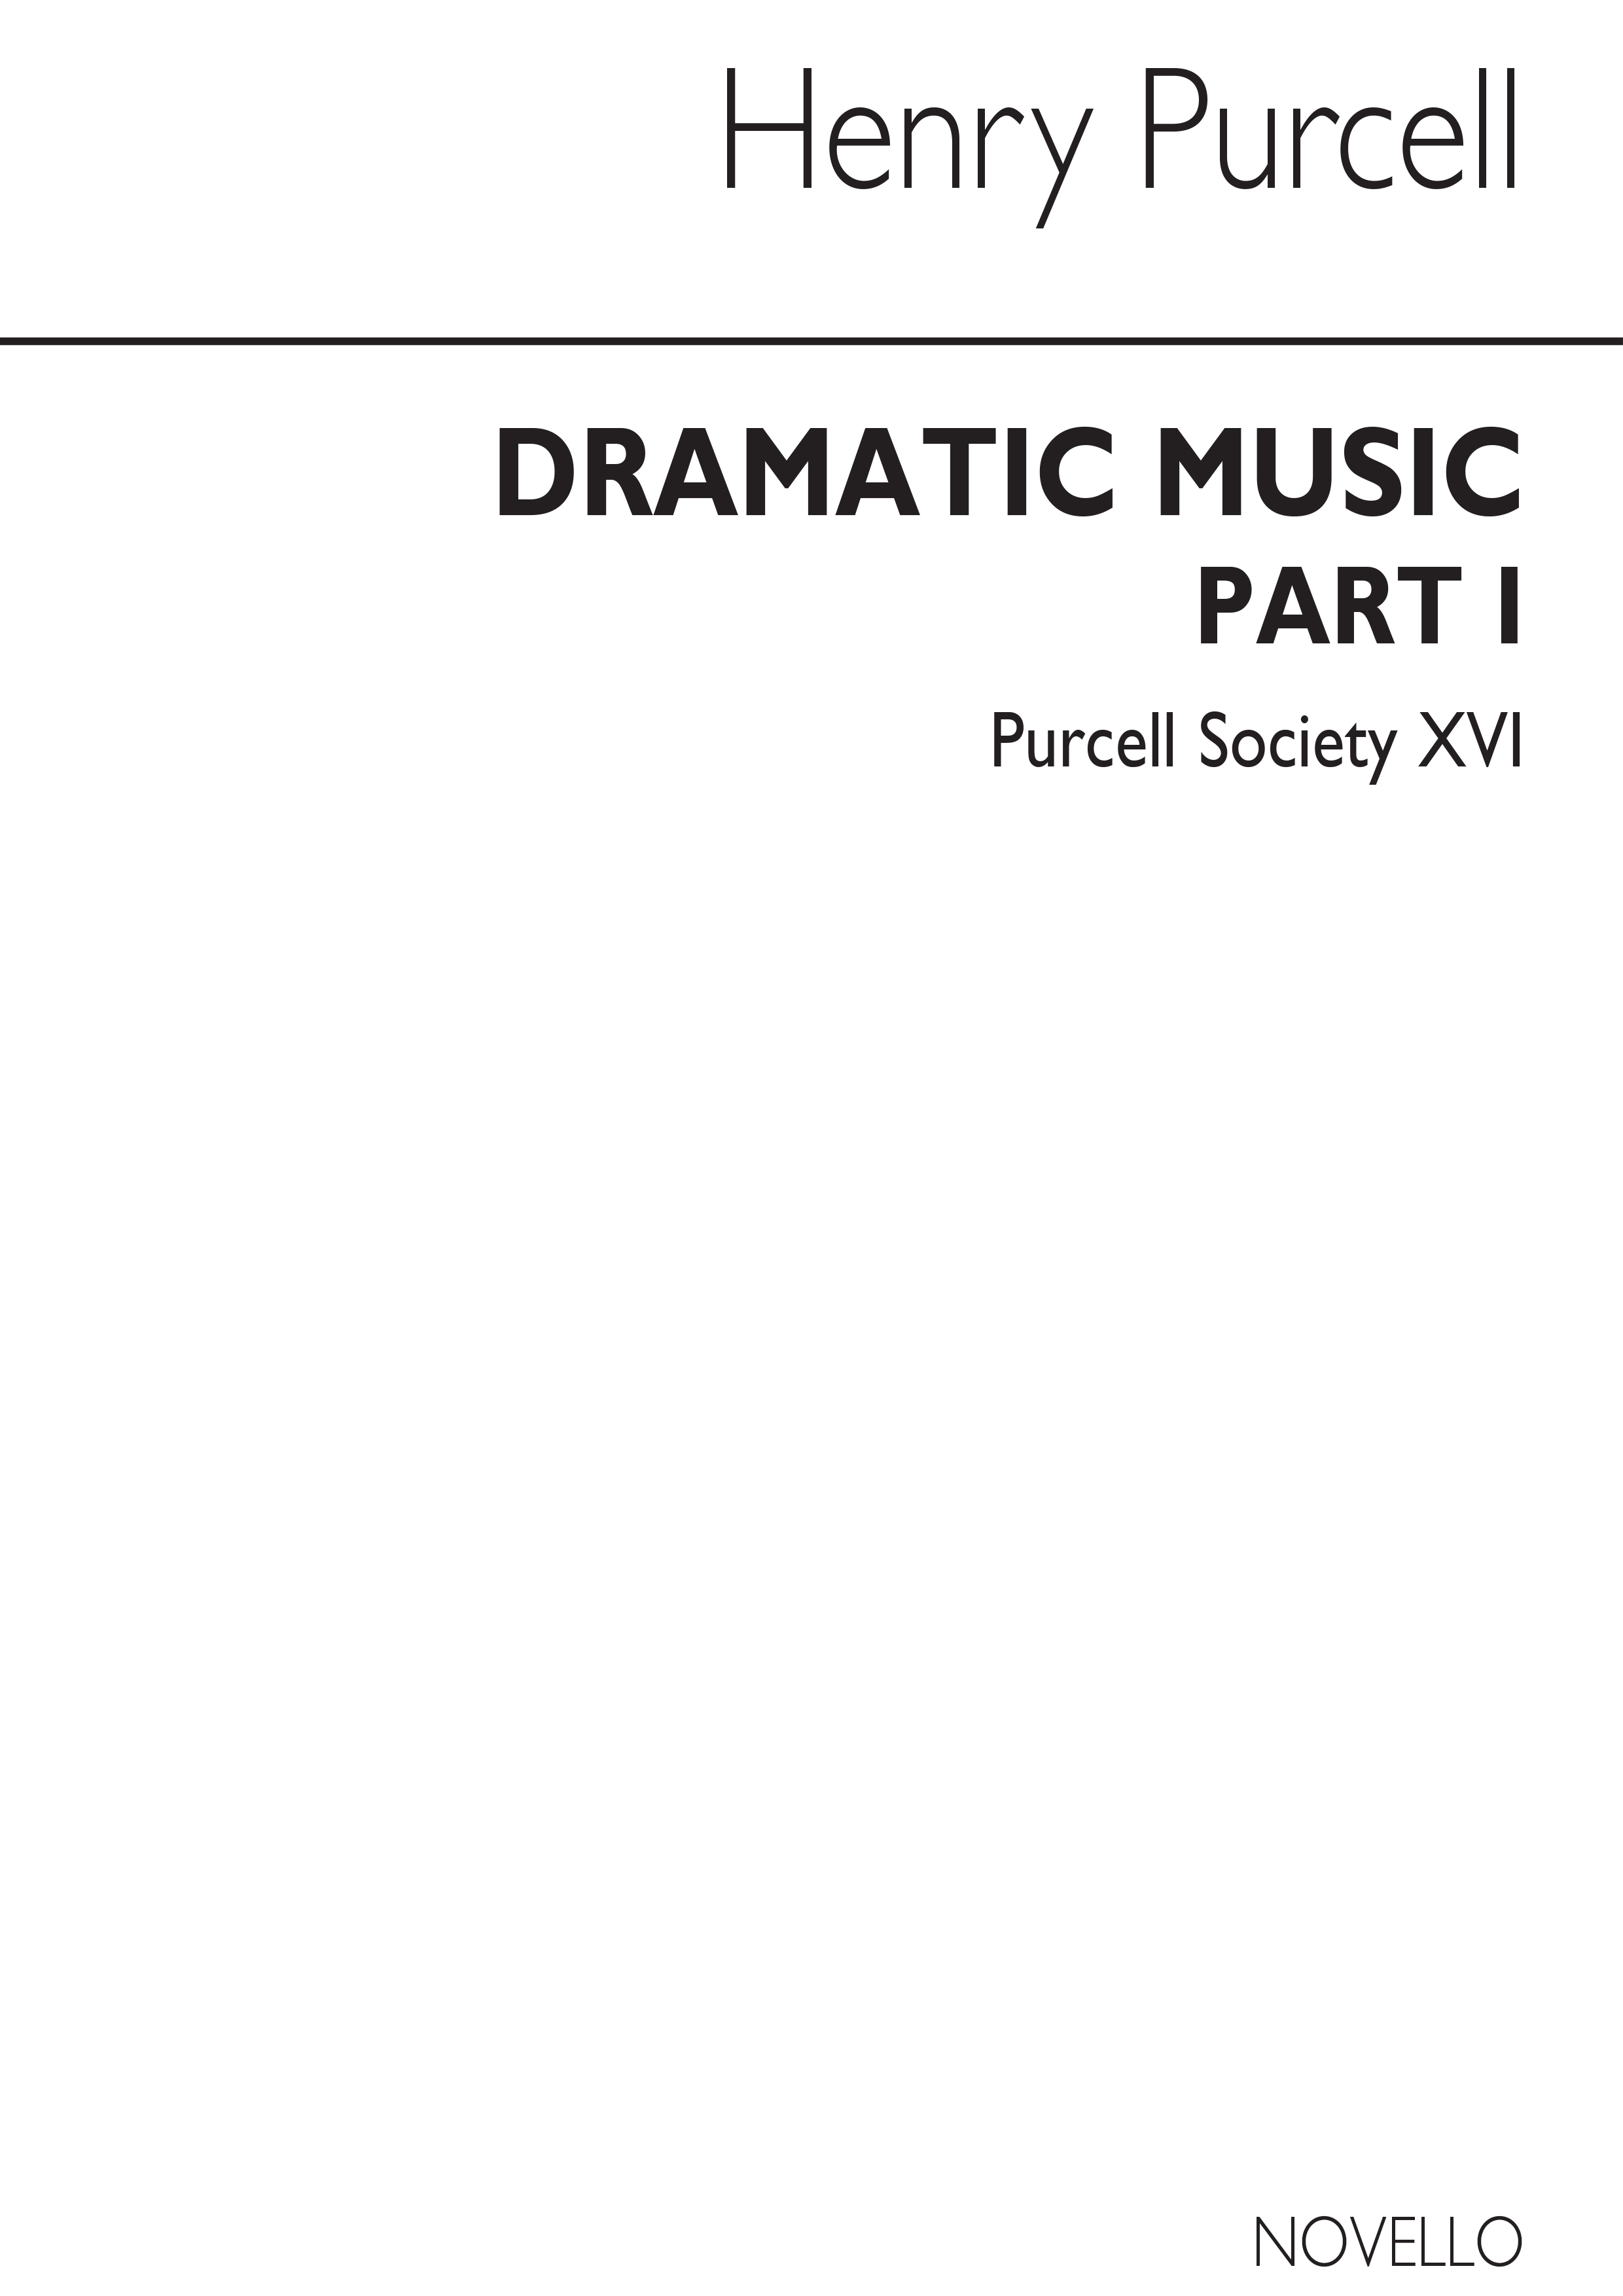 Purcell Society Volume - 16 Dramatic Music Part I (Original Engraving)